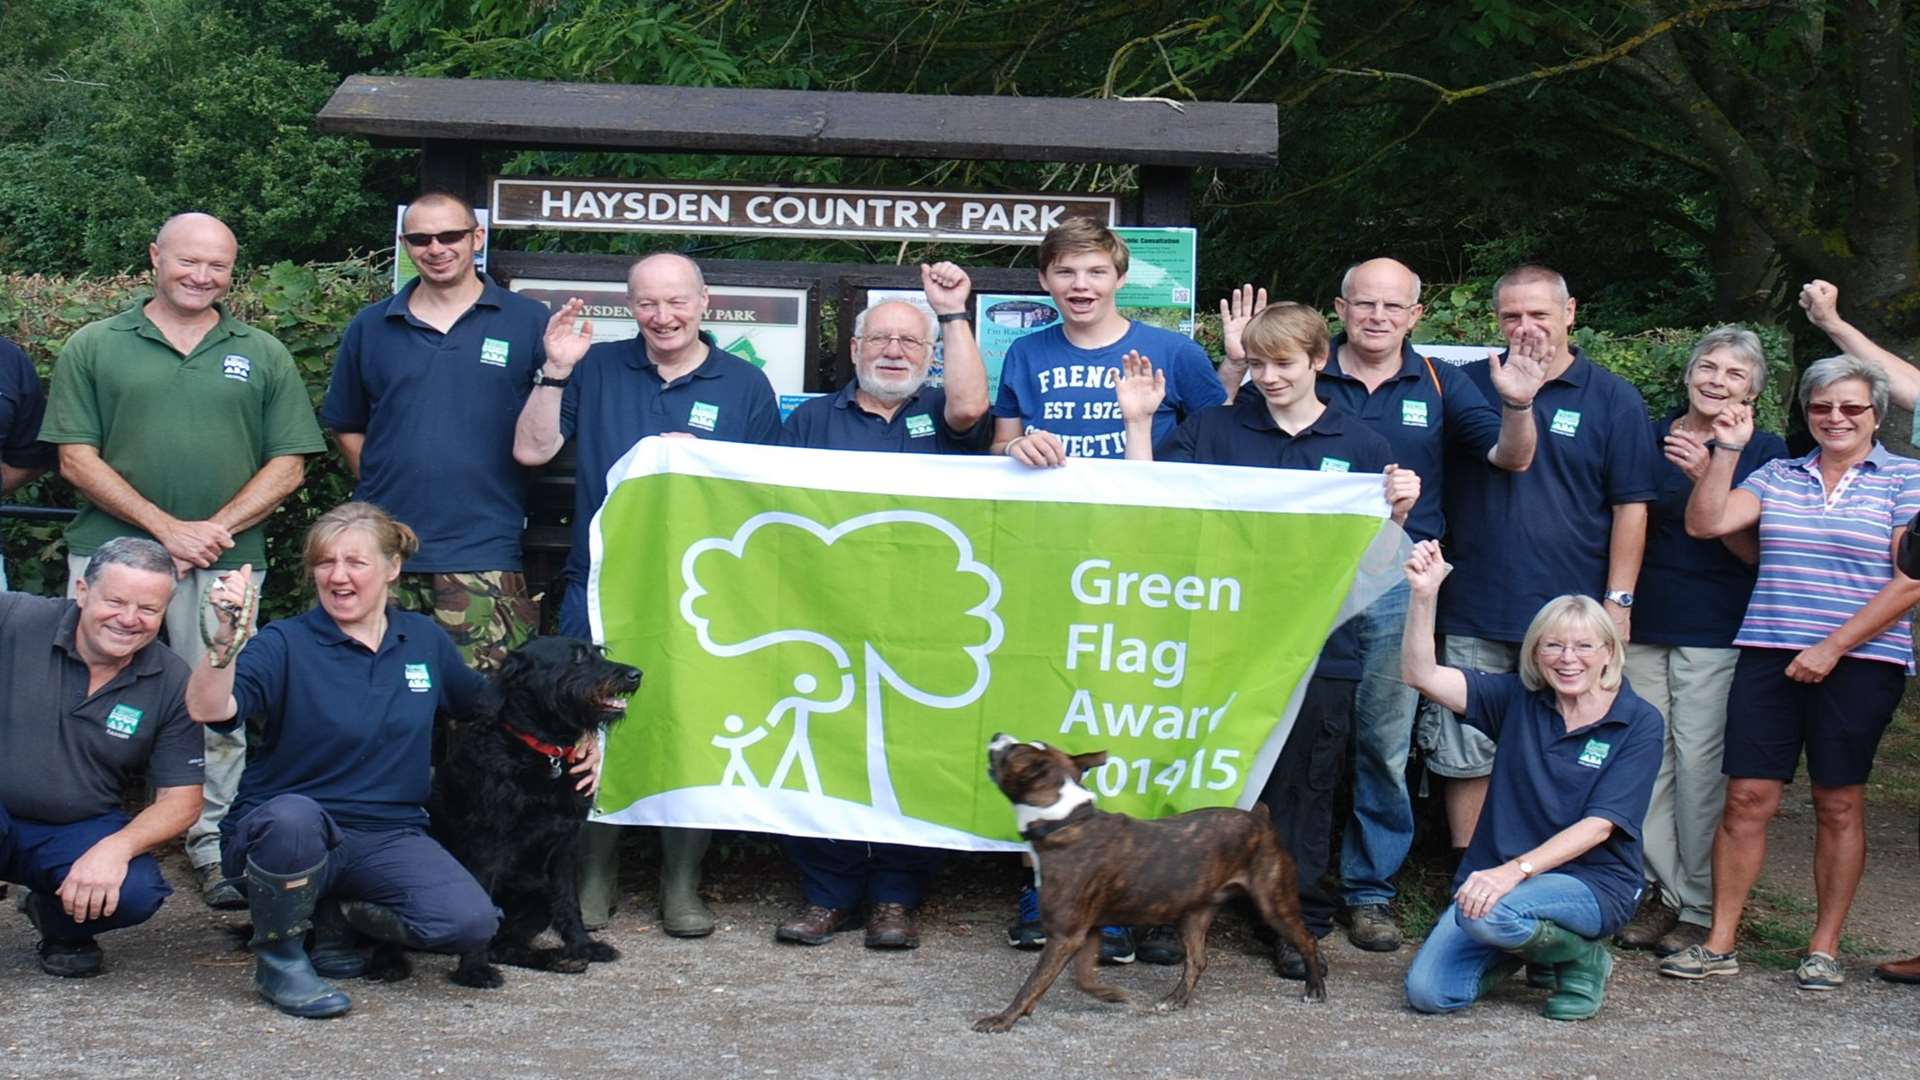 The Green Flag is displayed with pride at Haysden Country Park by: Volunteers, Tonbridge and Malling officers and, far right Borough Councillors Peter Bolt and David Cure